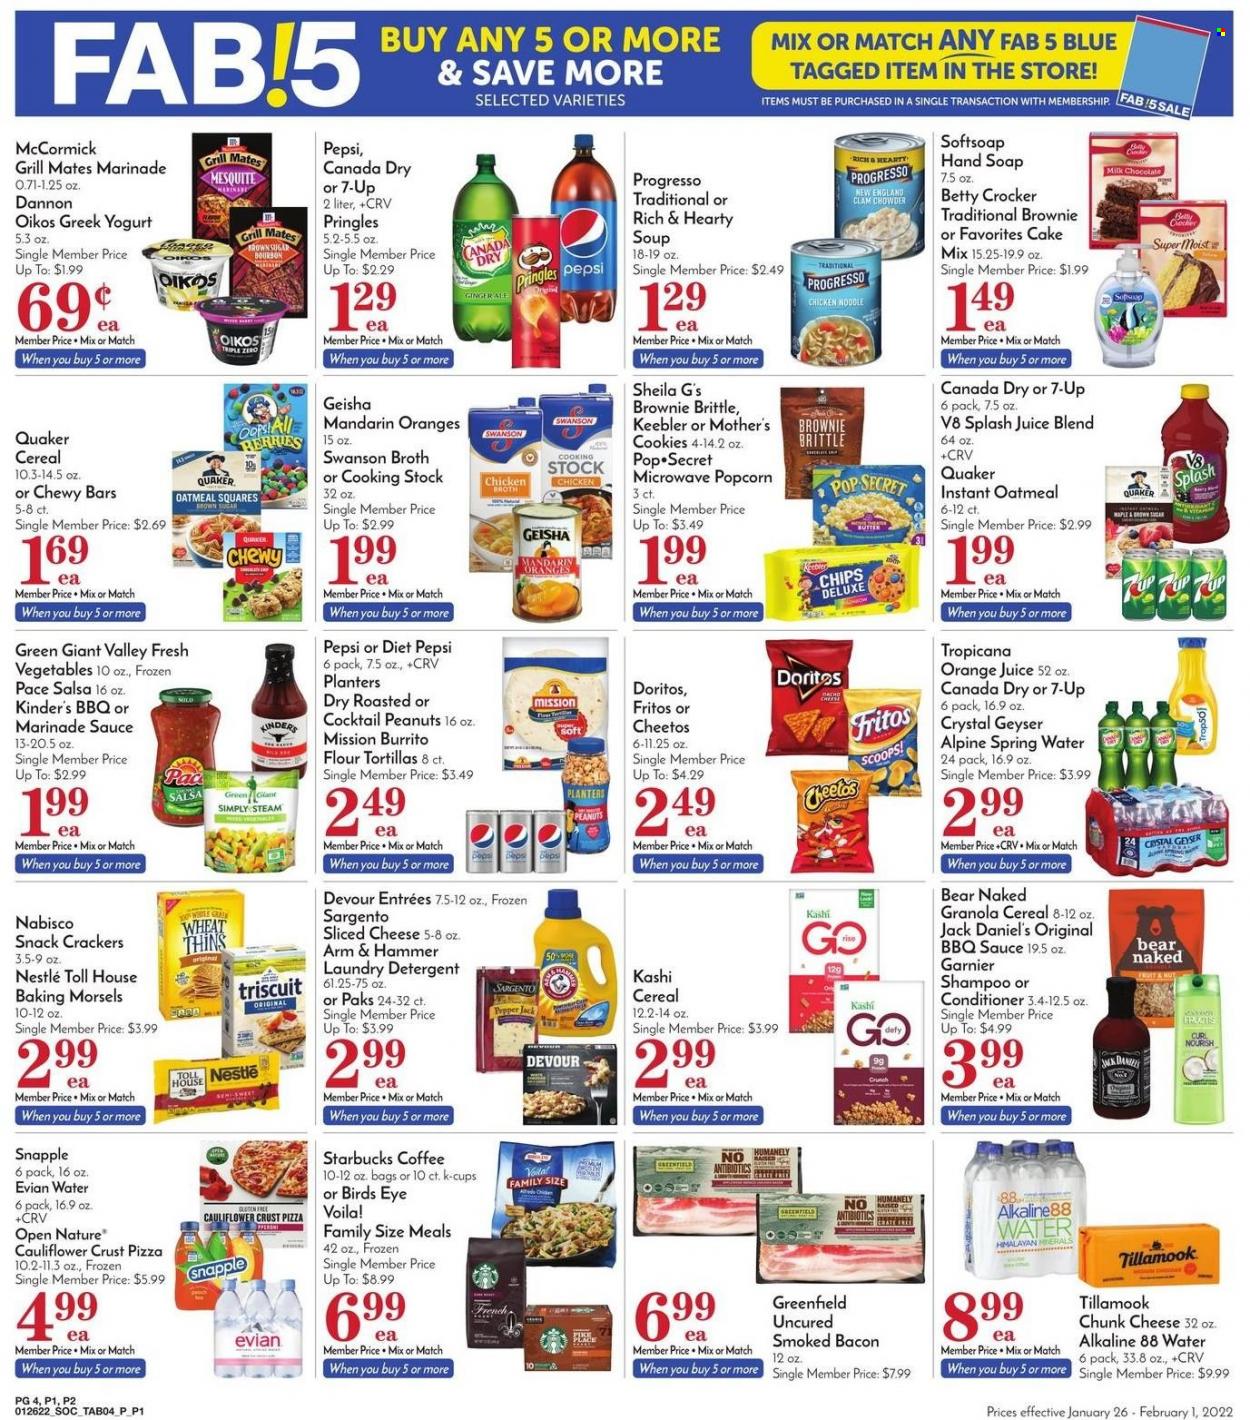 thumbnail - Pavilions Flyer - 01/26/2022 - 02/01/2022 - Sales products - tortillas, flour tortillas, brownies, cake mix, mandarines, Jack Daniel's, pizza, soup, sauce, Bird's Eye, burrito, Quaker, noodles, Progresso, bacon, sliced cheese, Pepper Jack cheese, chunk cheese, Sargento, greek yoghurt, yoghurt, Oikos, Dannon, Devour, cookies, milk chocolate, Nestlé, chocolate, snack, crackers, Keebler, Doritos, Fritos, Pringles, Cheetos, Thins, popcorn, ARM & HAMMER, chicken broth, oatmeal, broth, clam chowder, cereals, granola, BBQ sauce, salsa, marinade, peanuts, Planters, Canada Dry, Pepsi, orange juice, juice, Diet Pepsi, 7UP, Snapple, spring water, Evian, coffee, Starbucks, coffee capsules, K-Cups, detergent, laundry detergent, shampoo, Softsoap, hand soap, soap, Garnier, conditioner. Page 6.